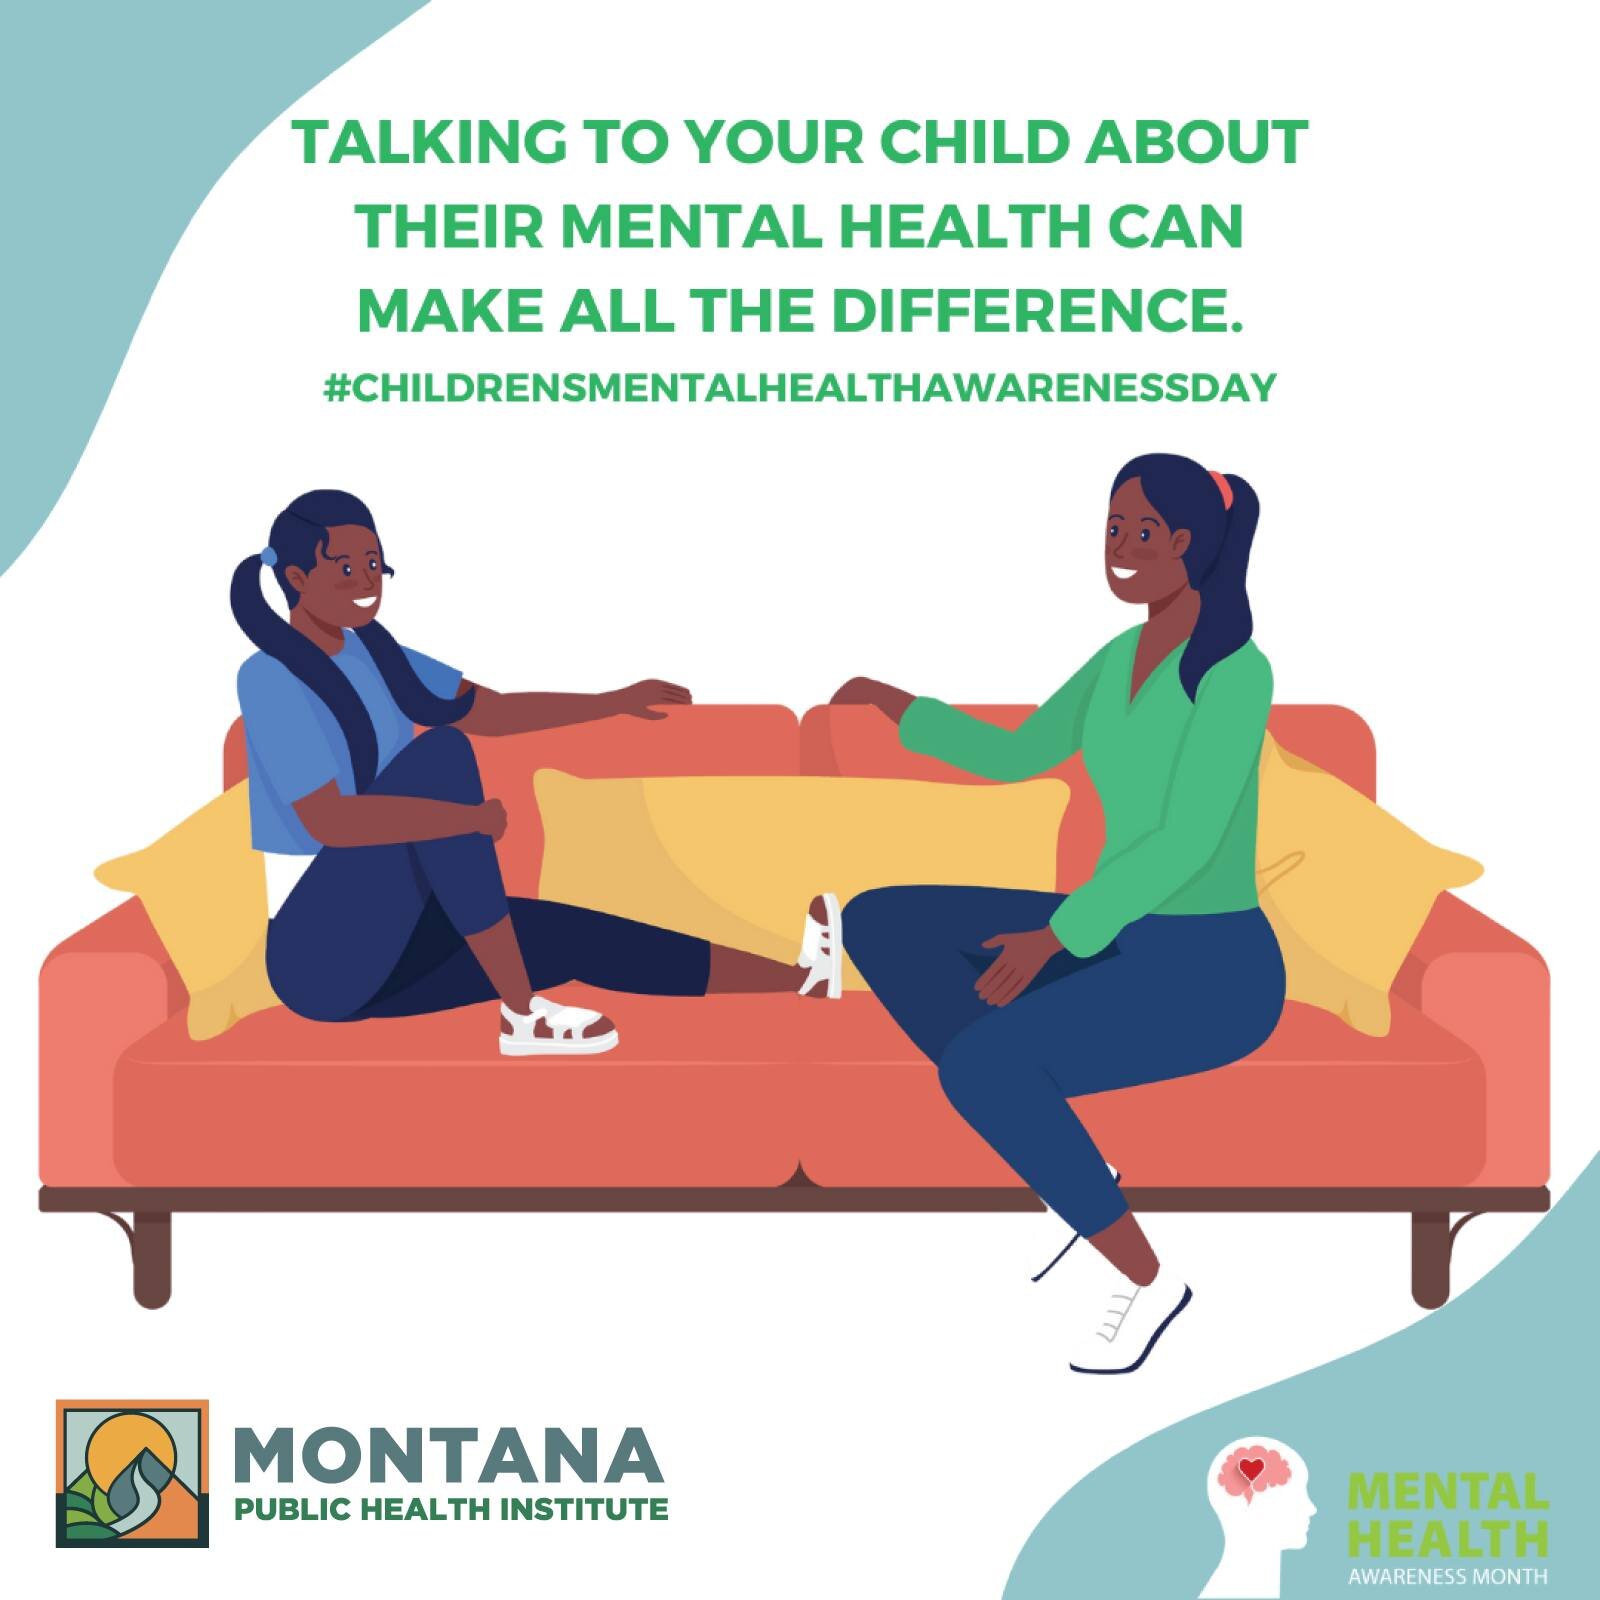 Today is National Children&rsquo;s Mental Health Awareness Day. This is a special day for all of us to recognize that our children&rsquo;s mental health matters! When a child is experiencing mental health challenges it impacts their family as well. T